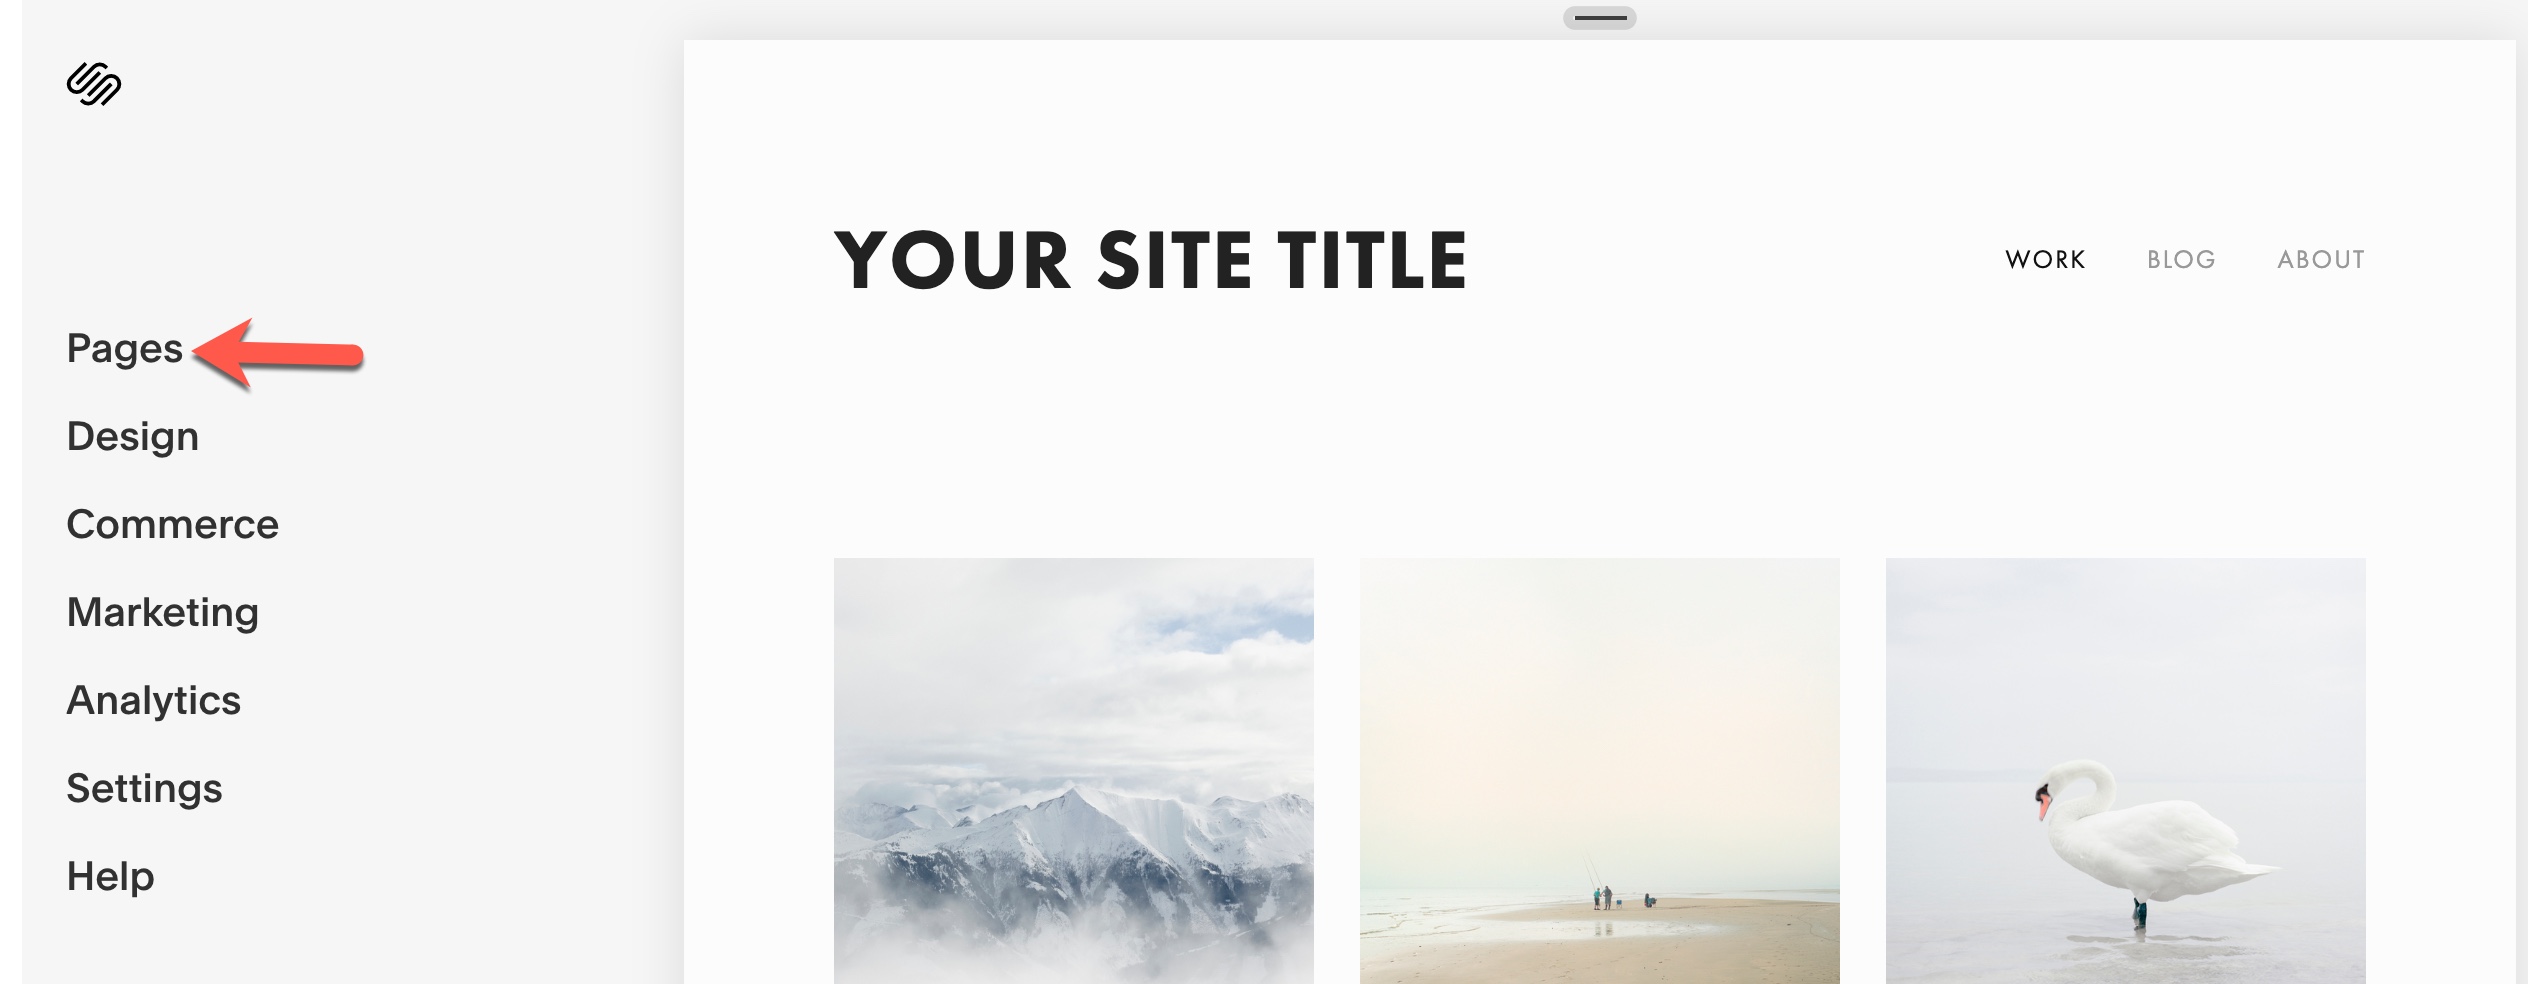 Squarespace Pages